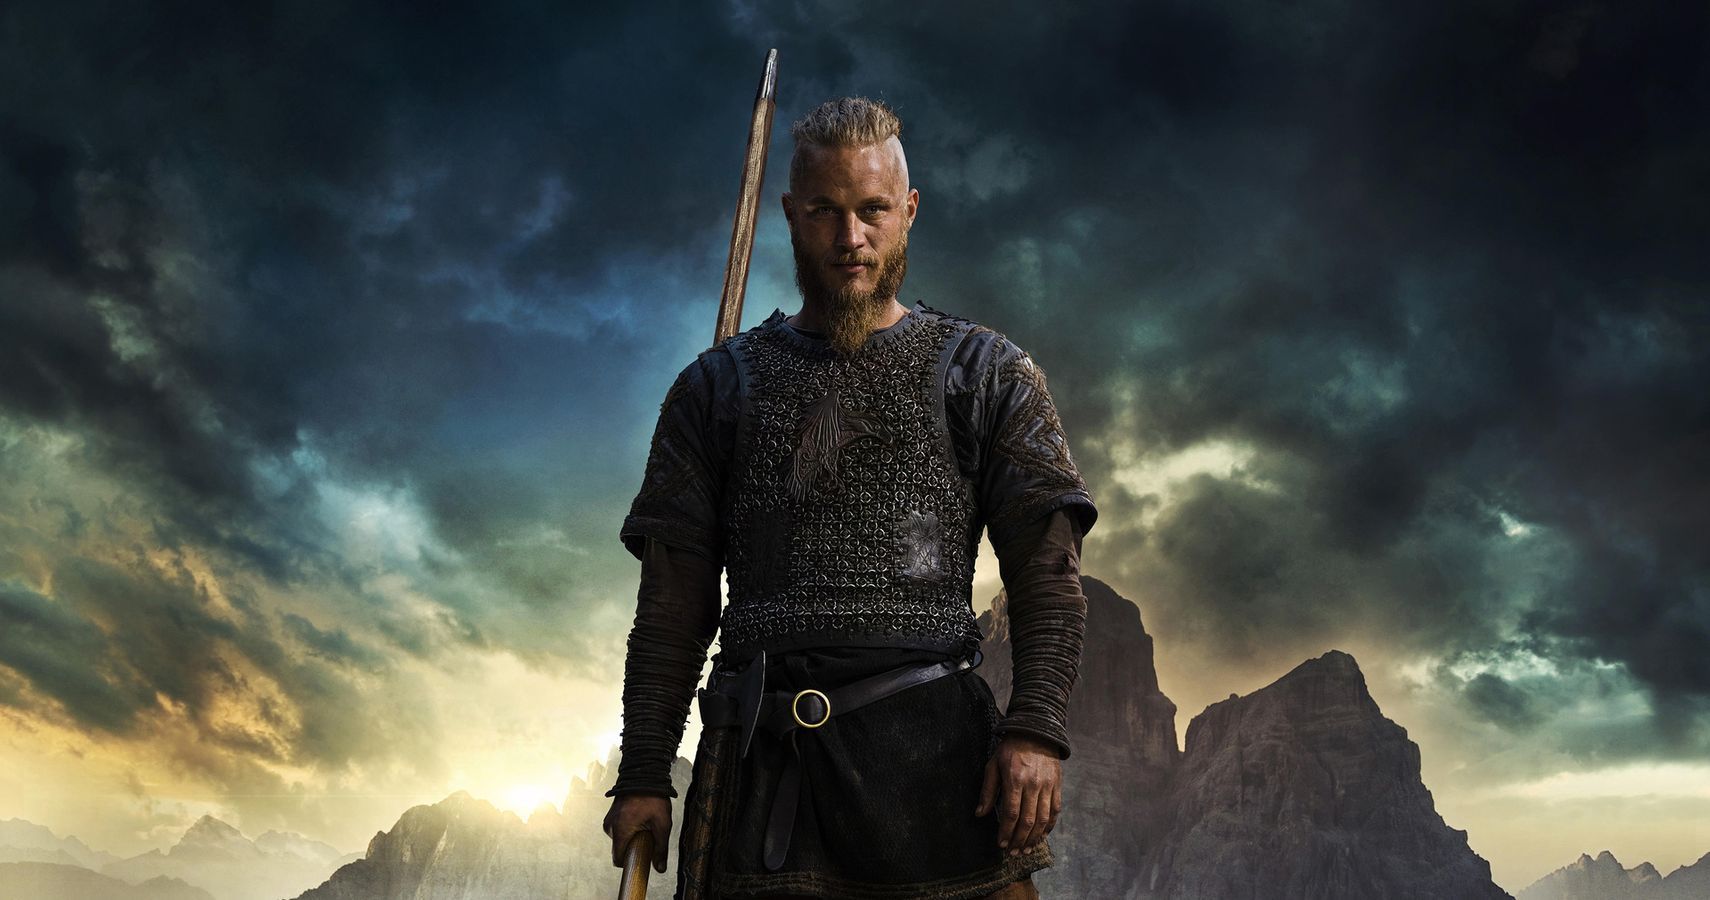 Vikings 5 Things That Are Historically Accurate (& 4 That Are Completely Fabricated) About Ragnar Lothbrok